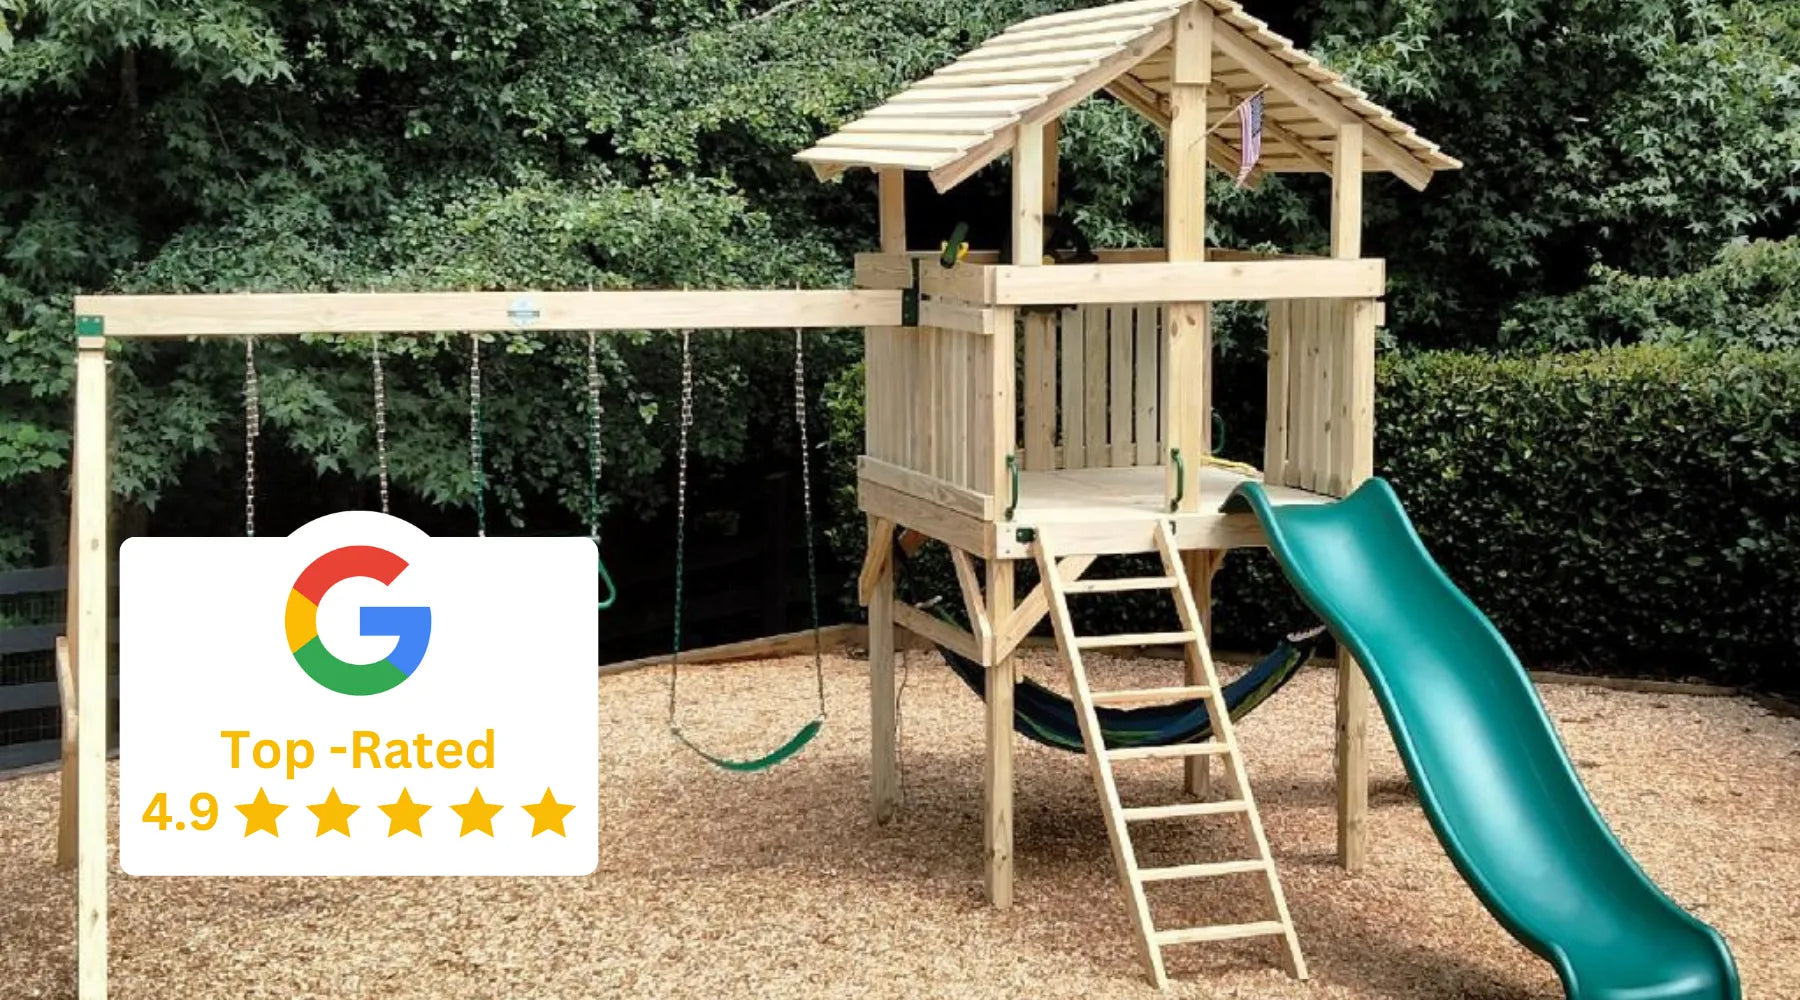 The Swingset Co. is top rated on Google!